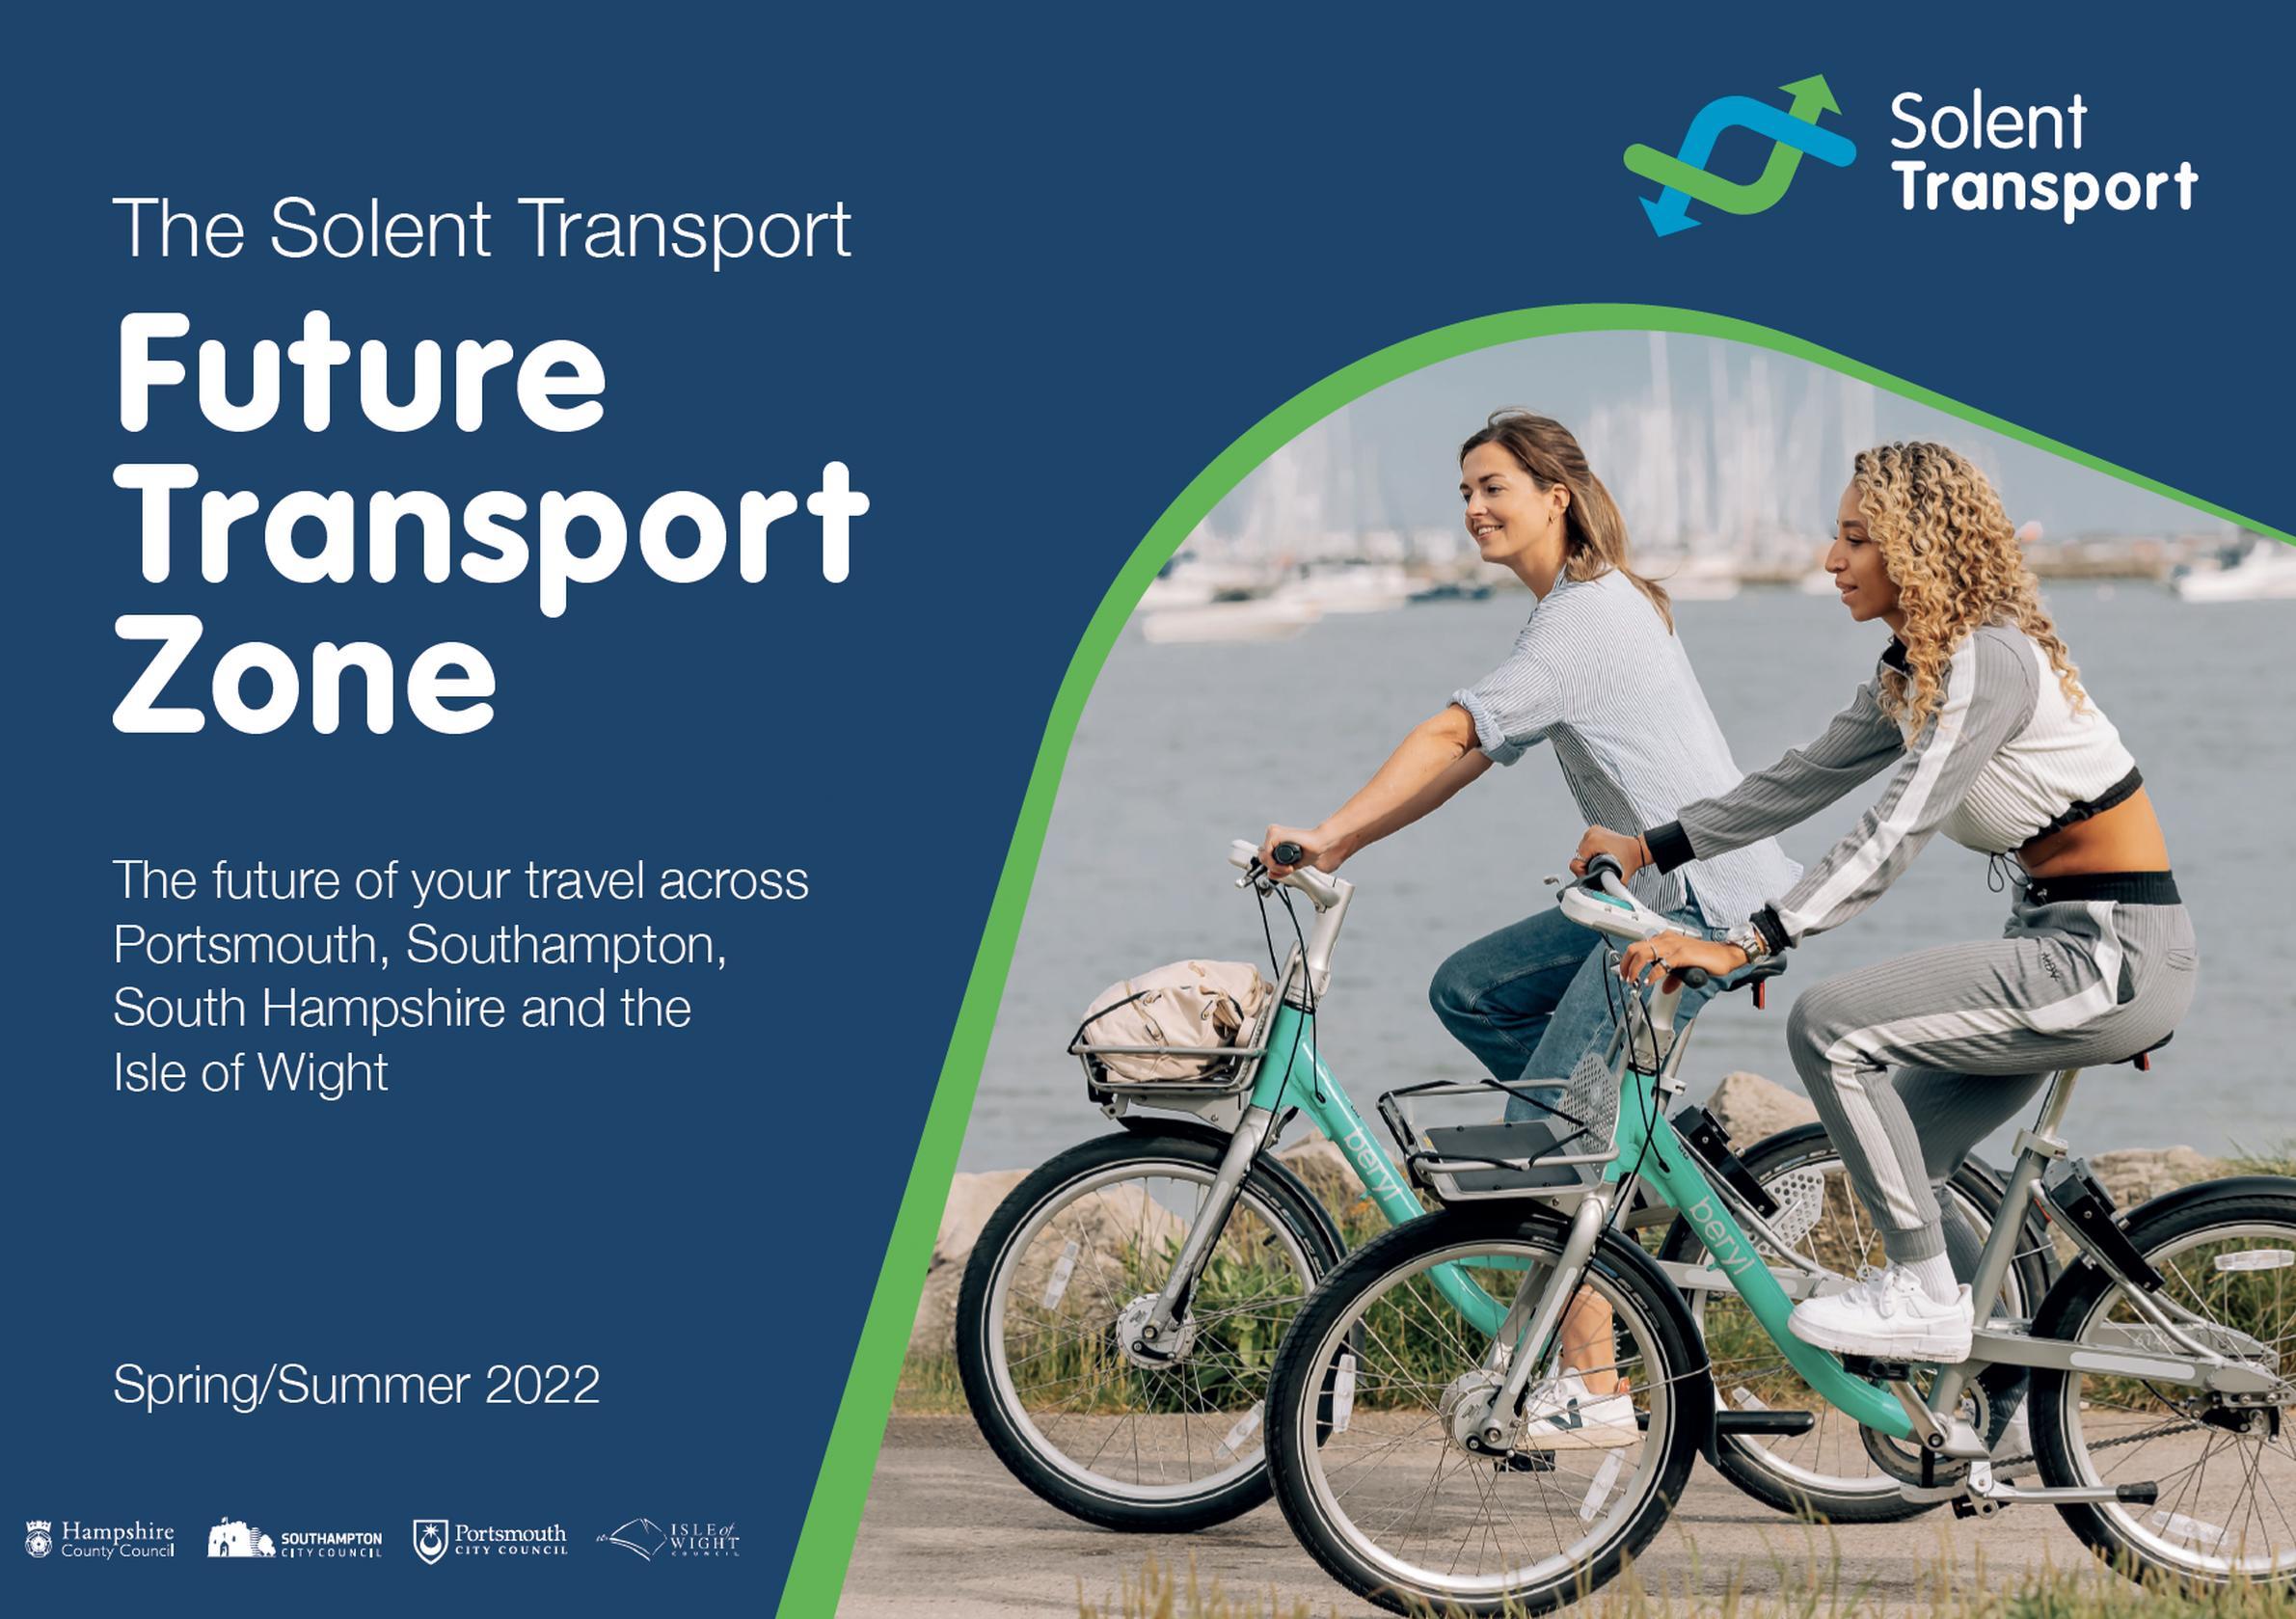 The Solent Future Transport Zone (Solent FTZ) was one of four areas across the UK chosen and funded by the DfT to trial new and better ways of providing public transport and logistics